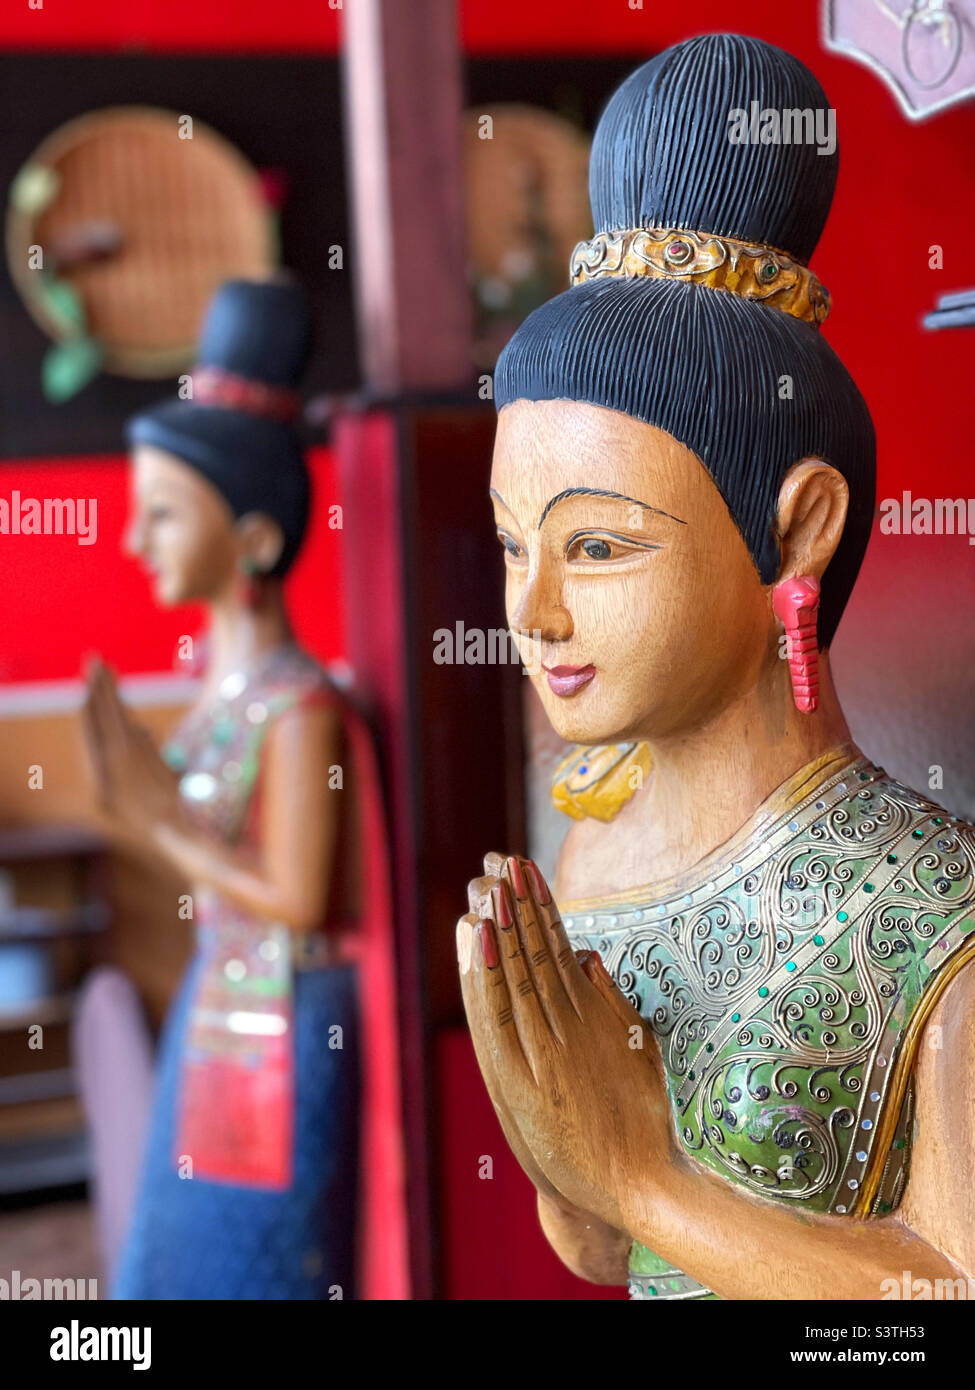 Carved wooden figures welcoming to Thai restaurant Stock Photo